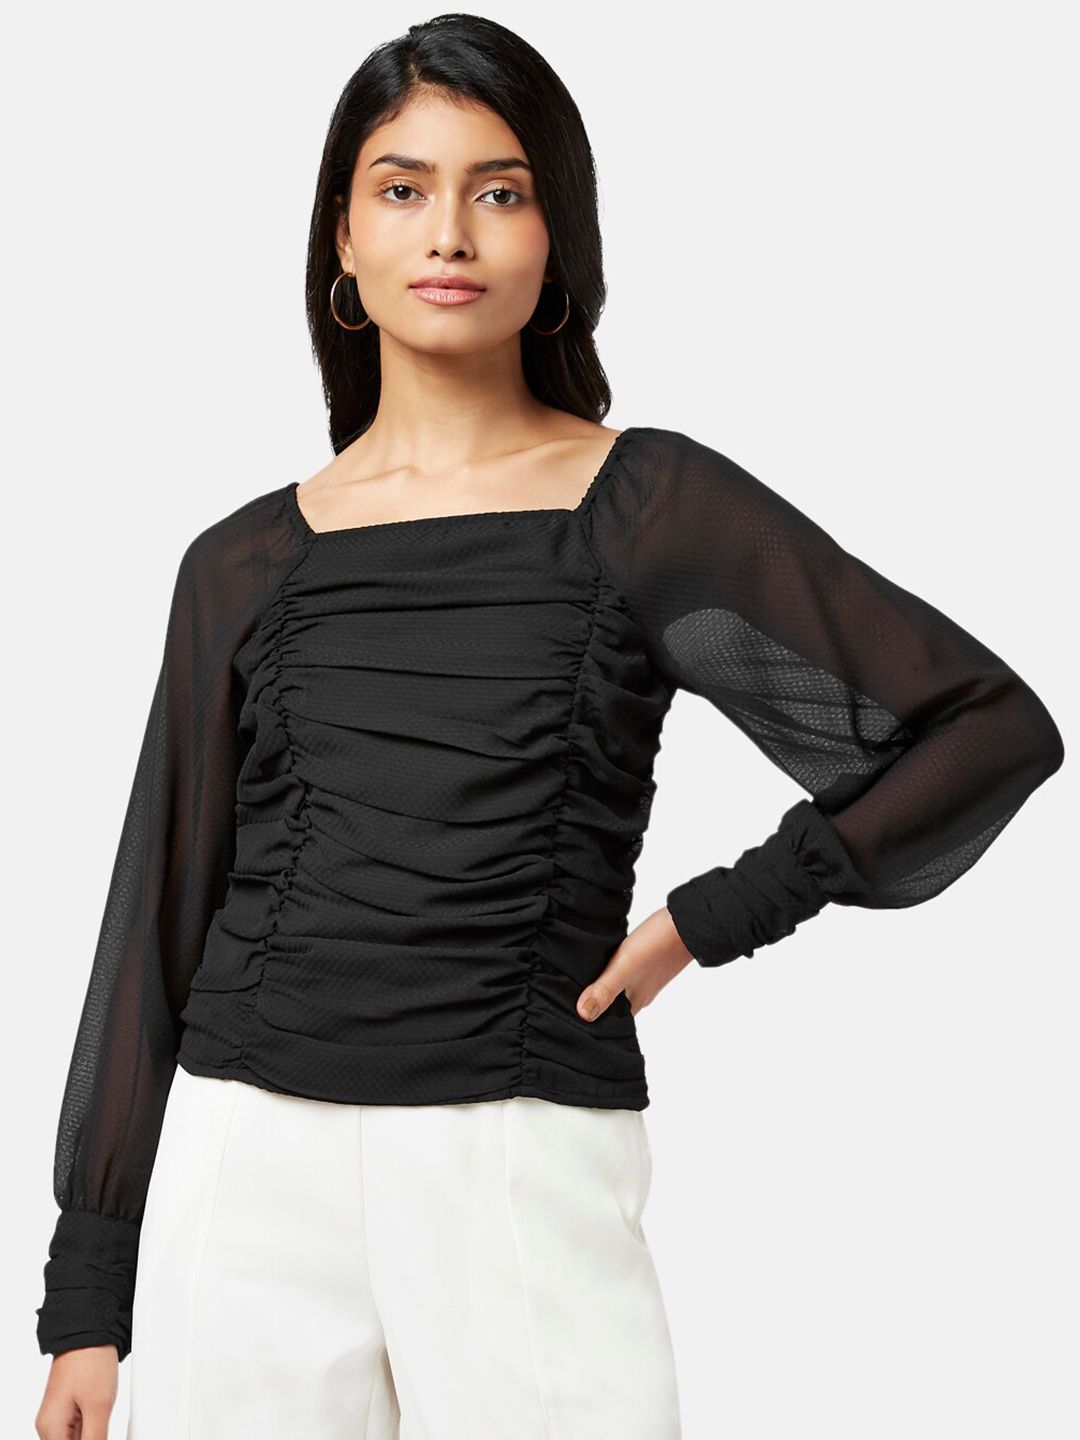 Honey by Pantaloons Black Self-Design Ruched Top Price in India